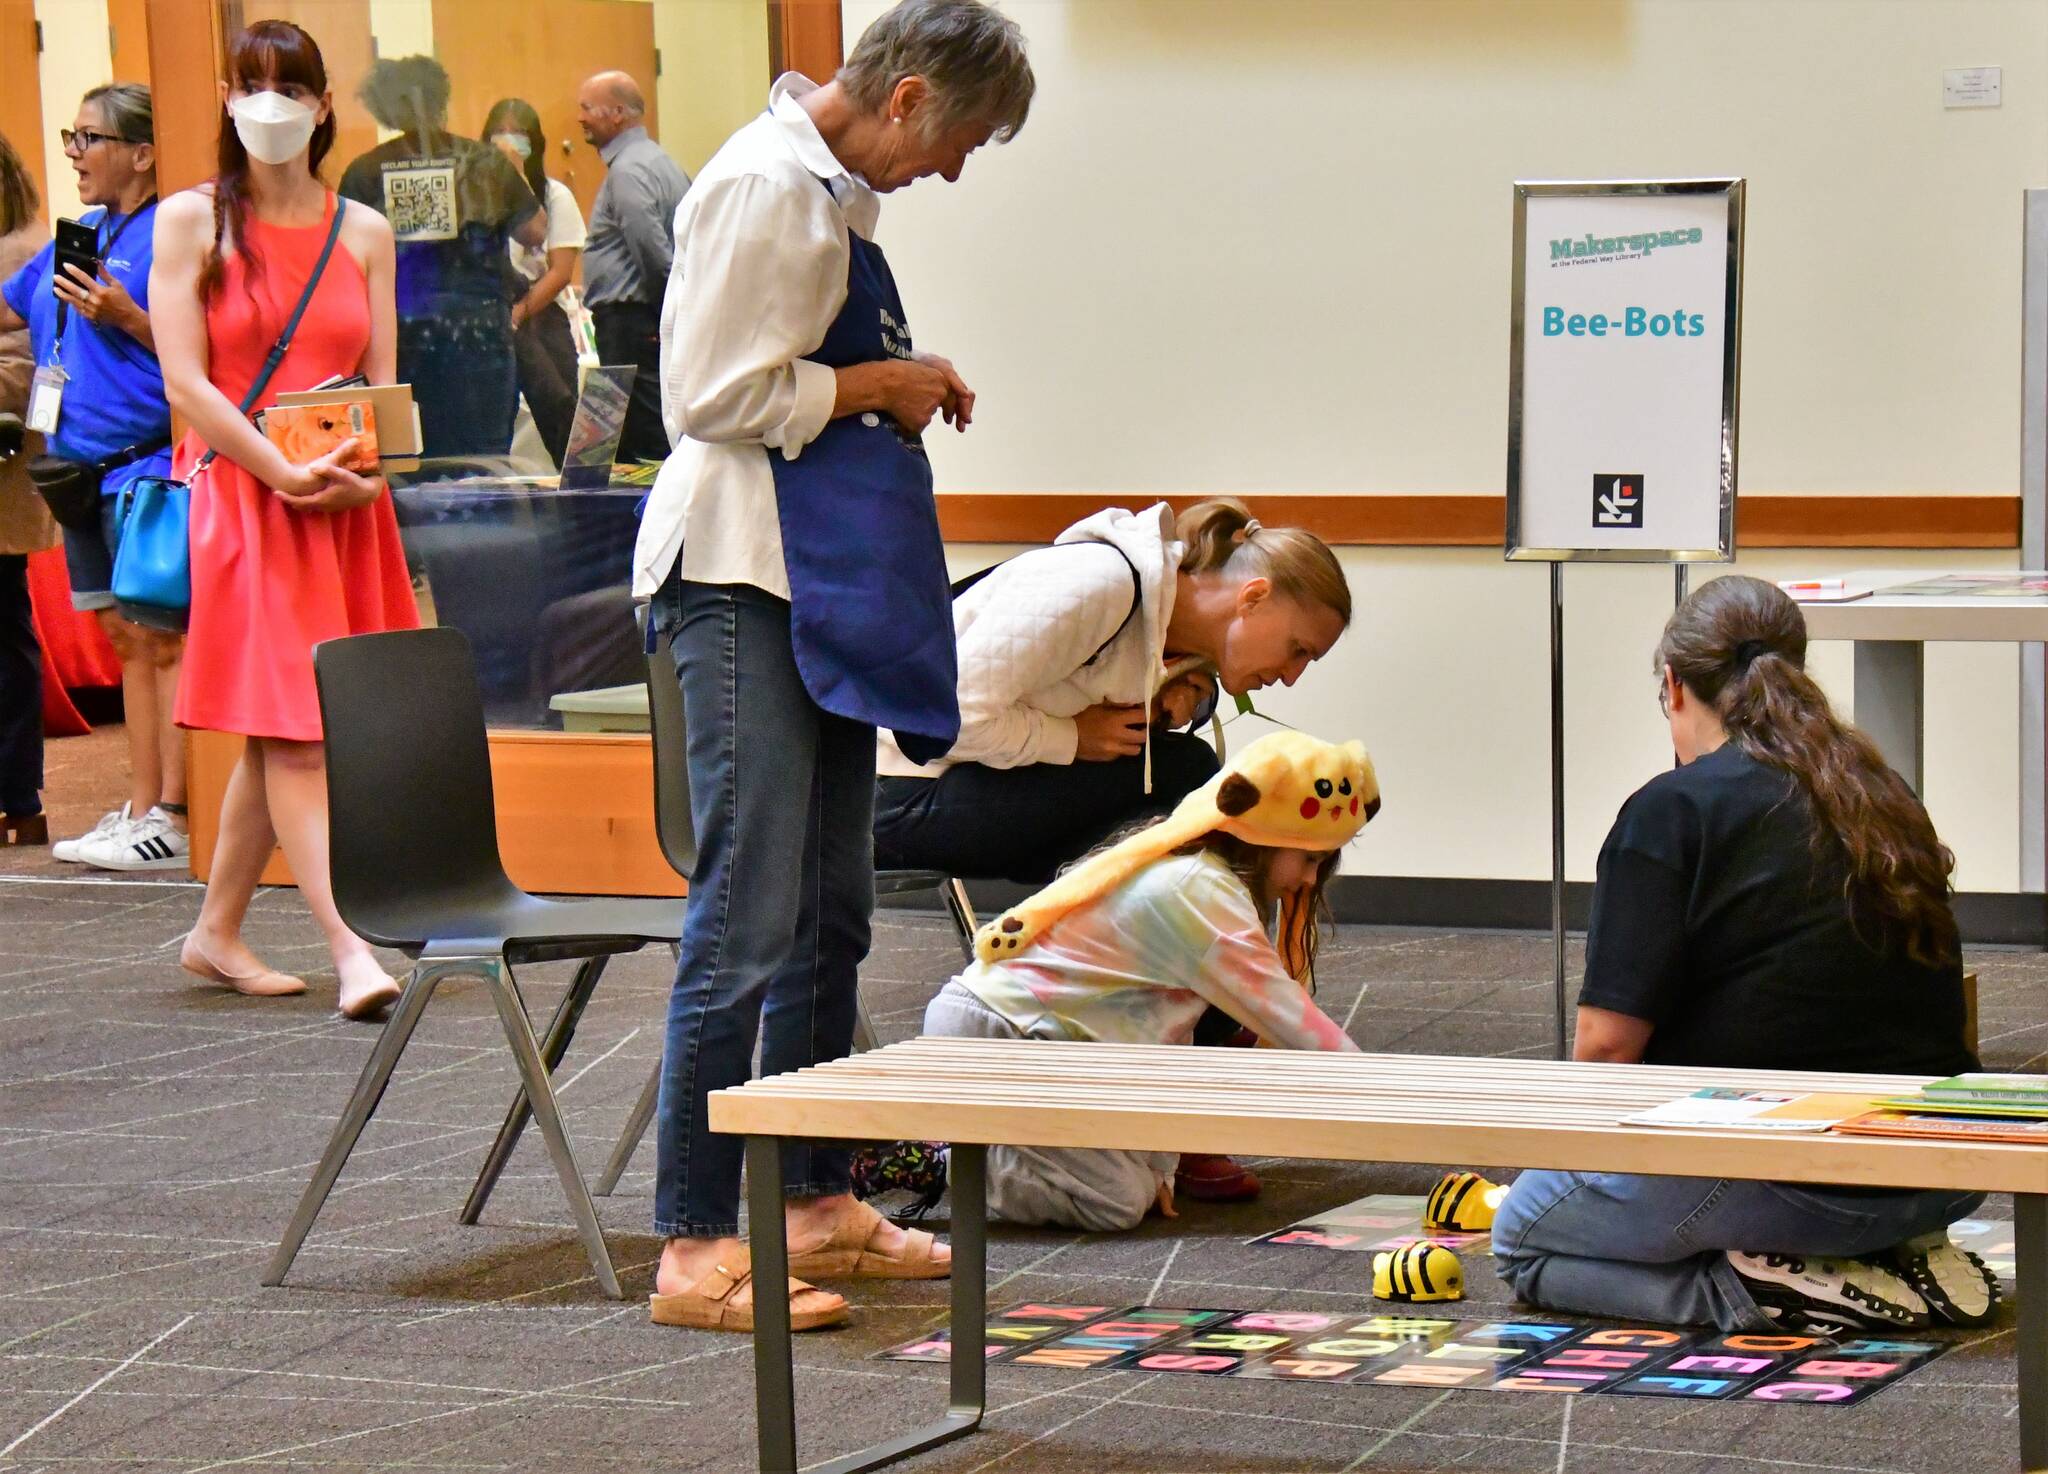 The Makerspace at the Federal Way Library officially opened Sept. 17. It provides free hands-on learning opportunities to explore emerging technologies from engineering, robotics, coding and 3D printing, to sewing and music production. Photo courtesy of Bruce Honda